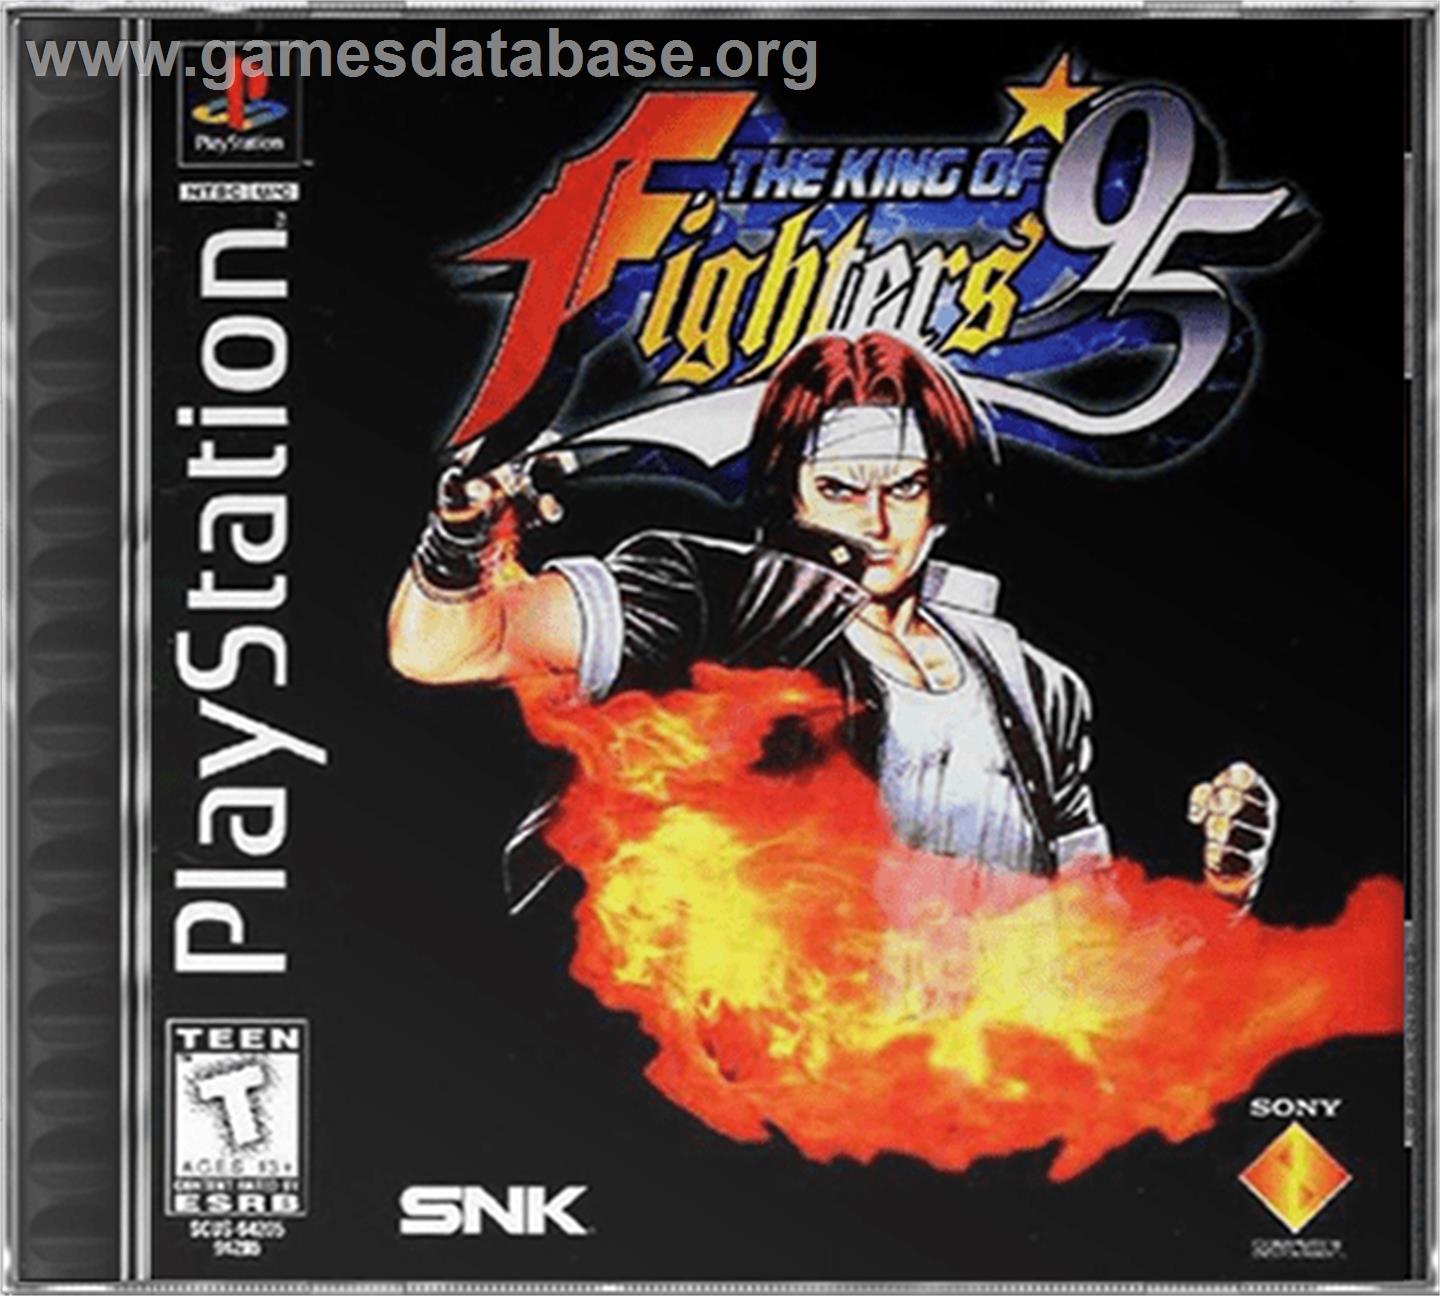 The King of Fighters '95 - Sony Playstation - Artwork - Box